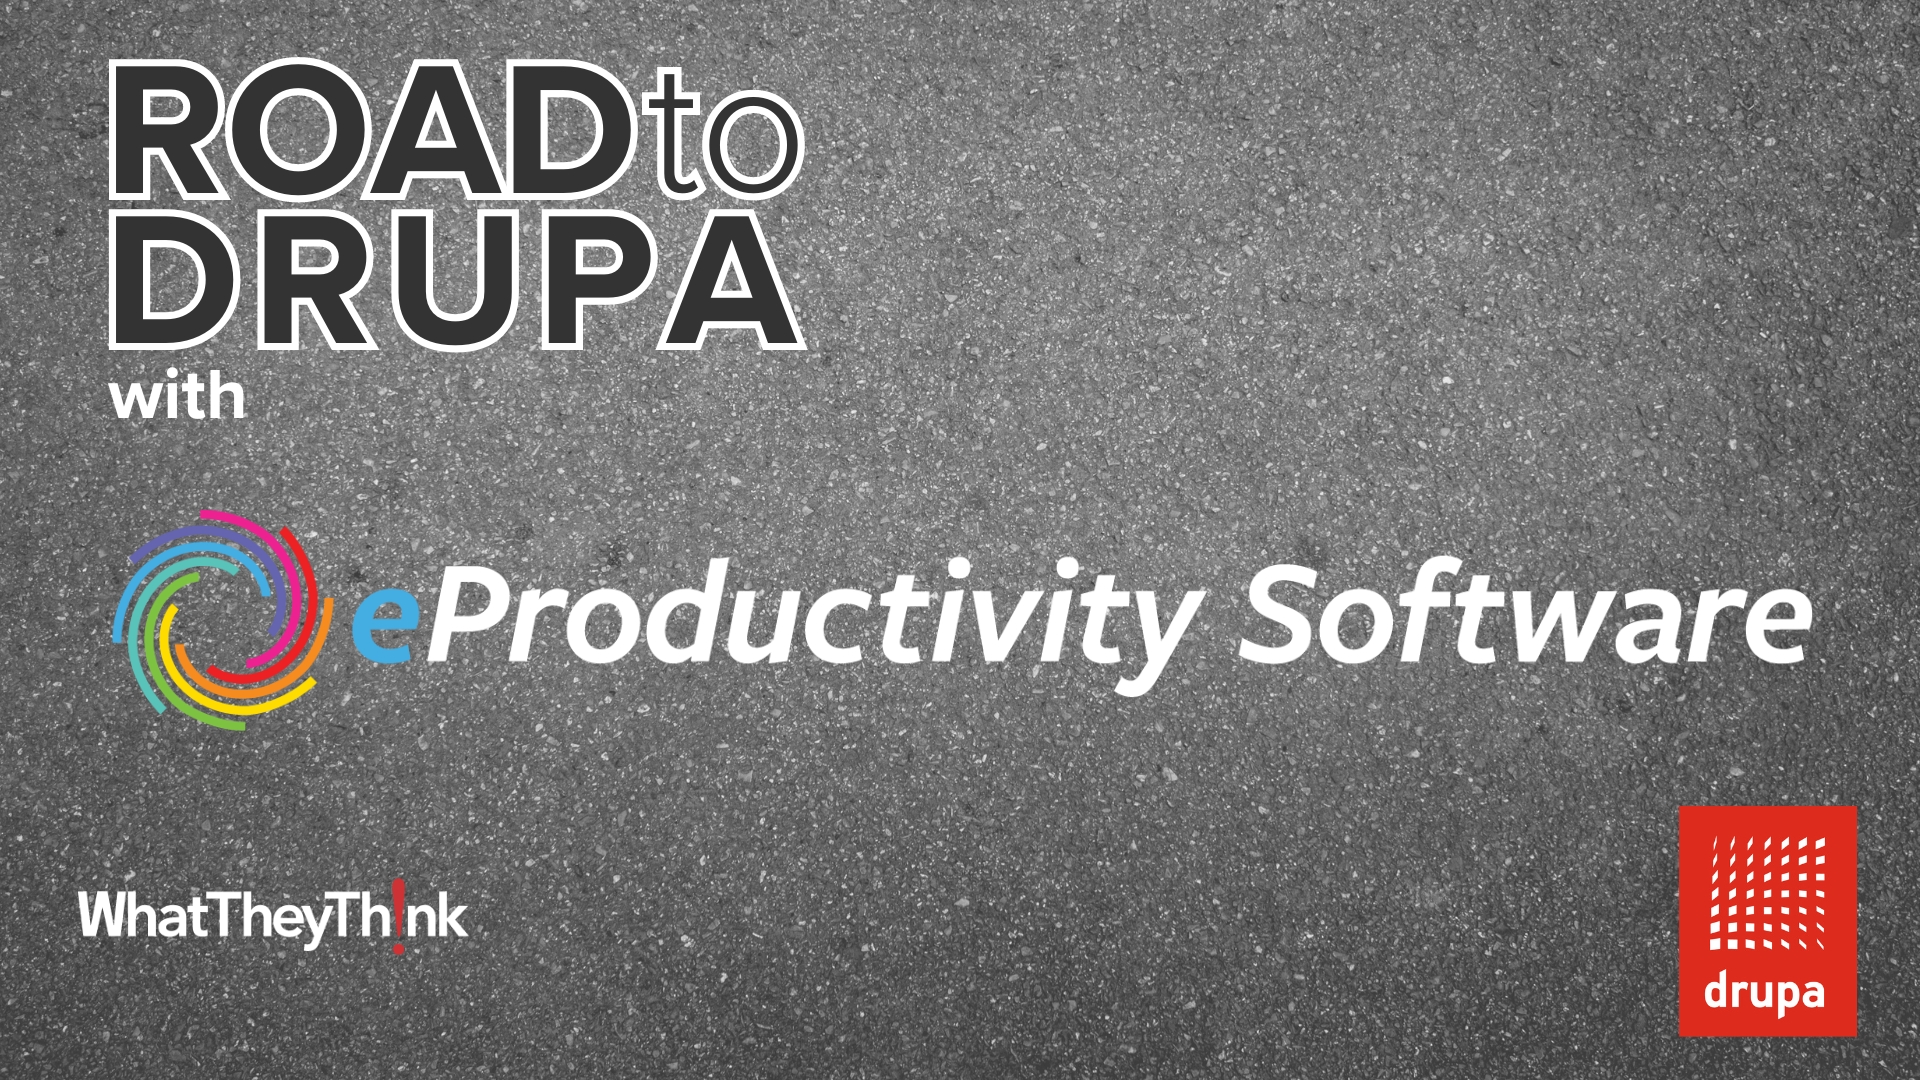 Road to drupa: eProductivity Software